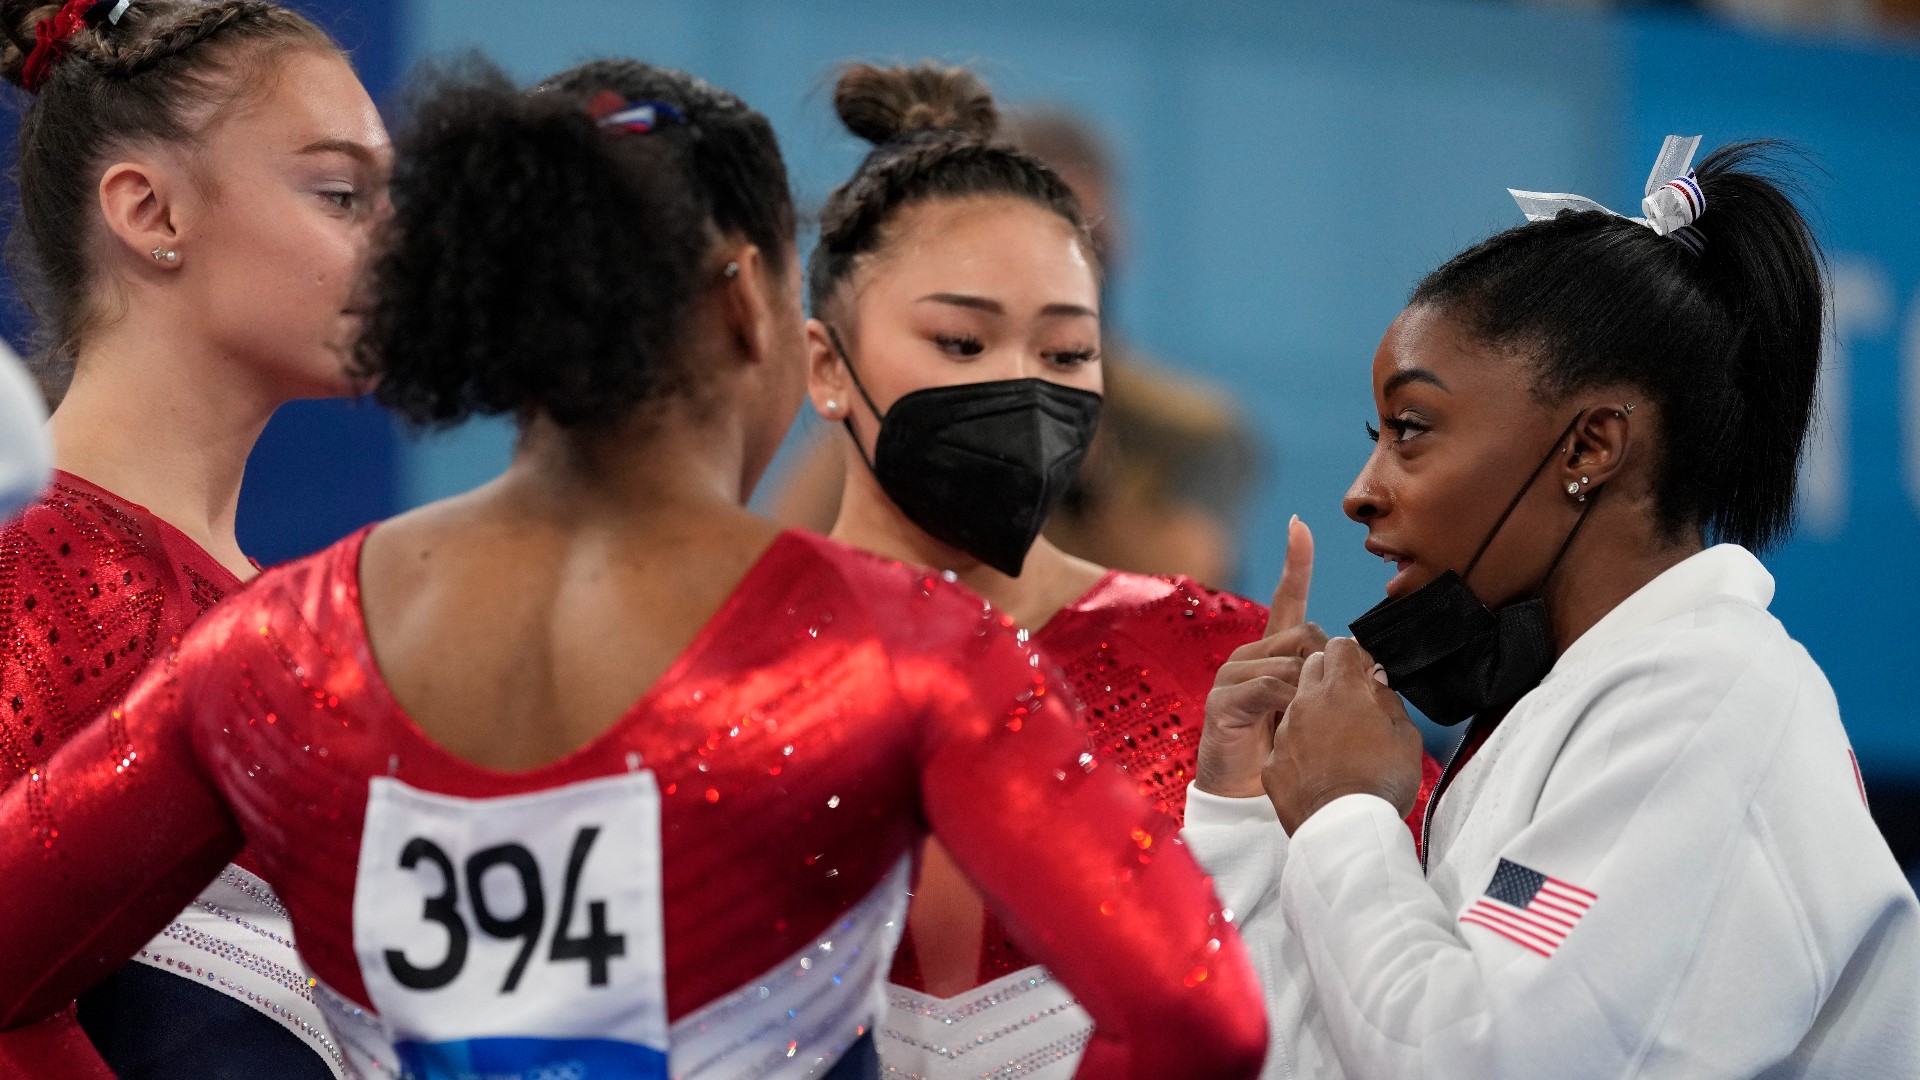 With Simone Biles out, Suni Lee and Jade Carey will represent Team USA in the women's gymnastics all-around final.